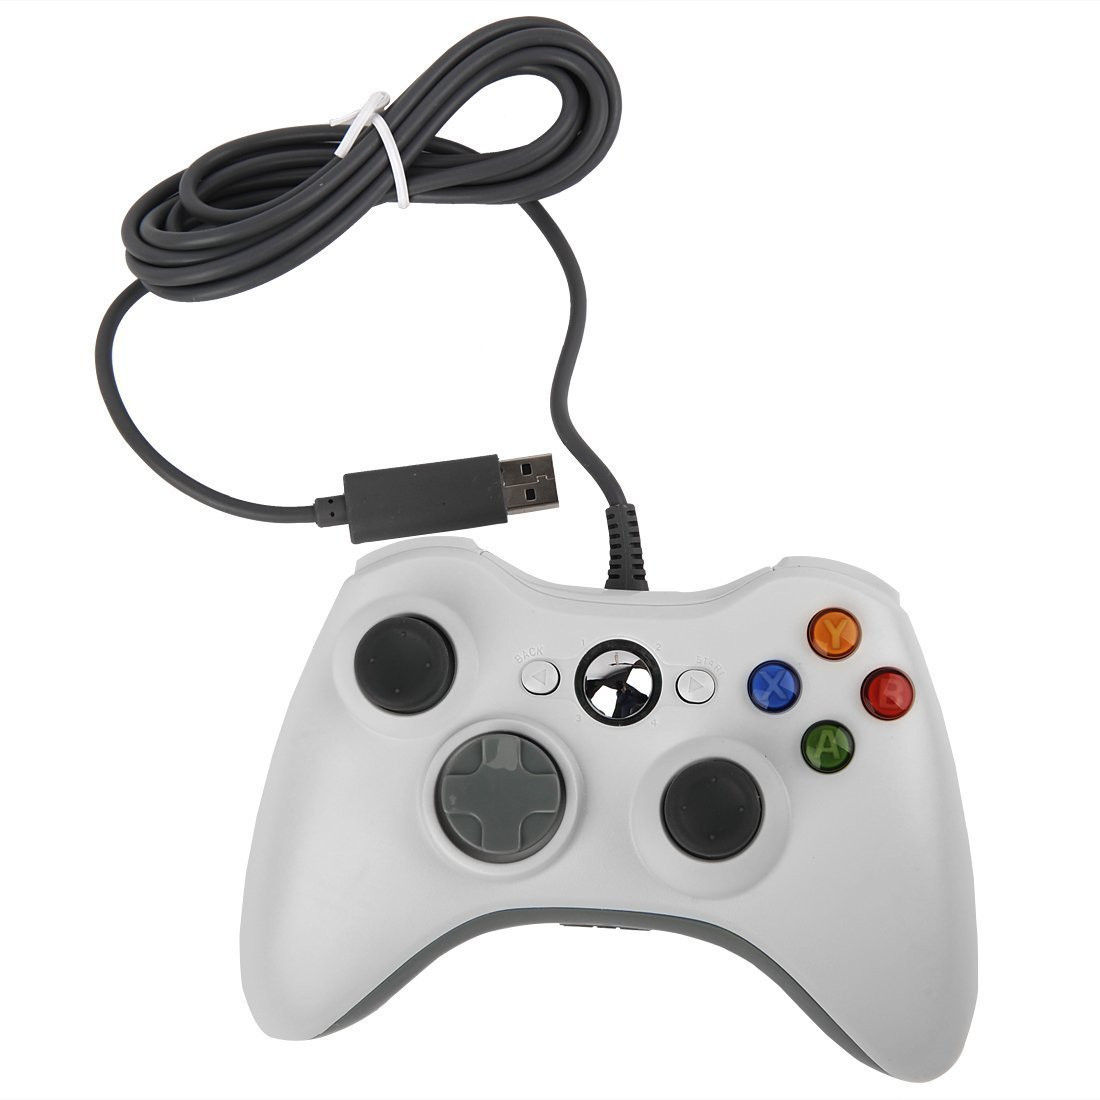 xbox 360 wired controller new